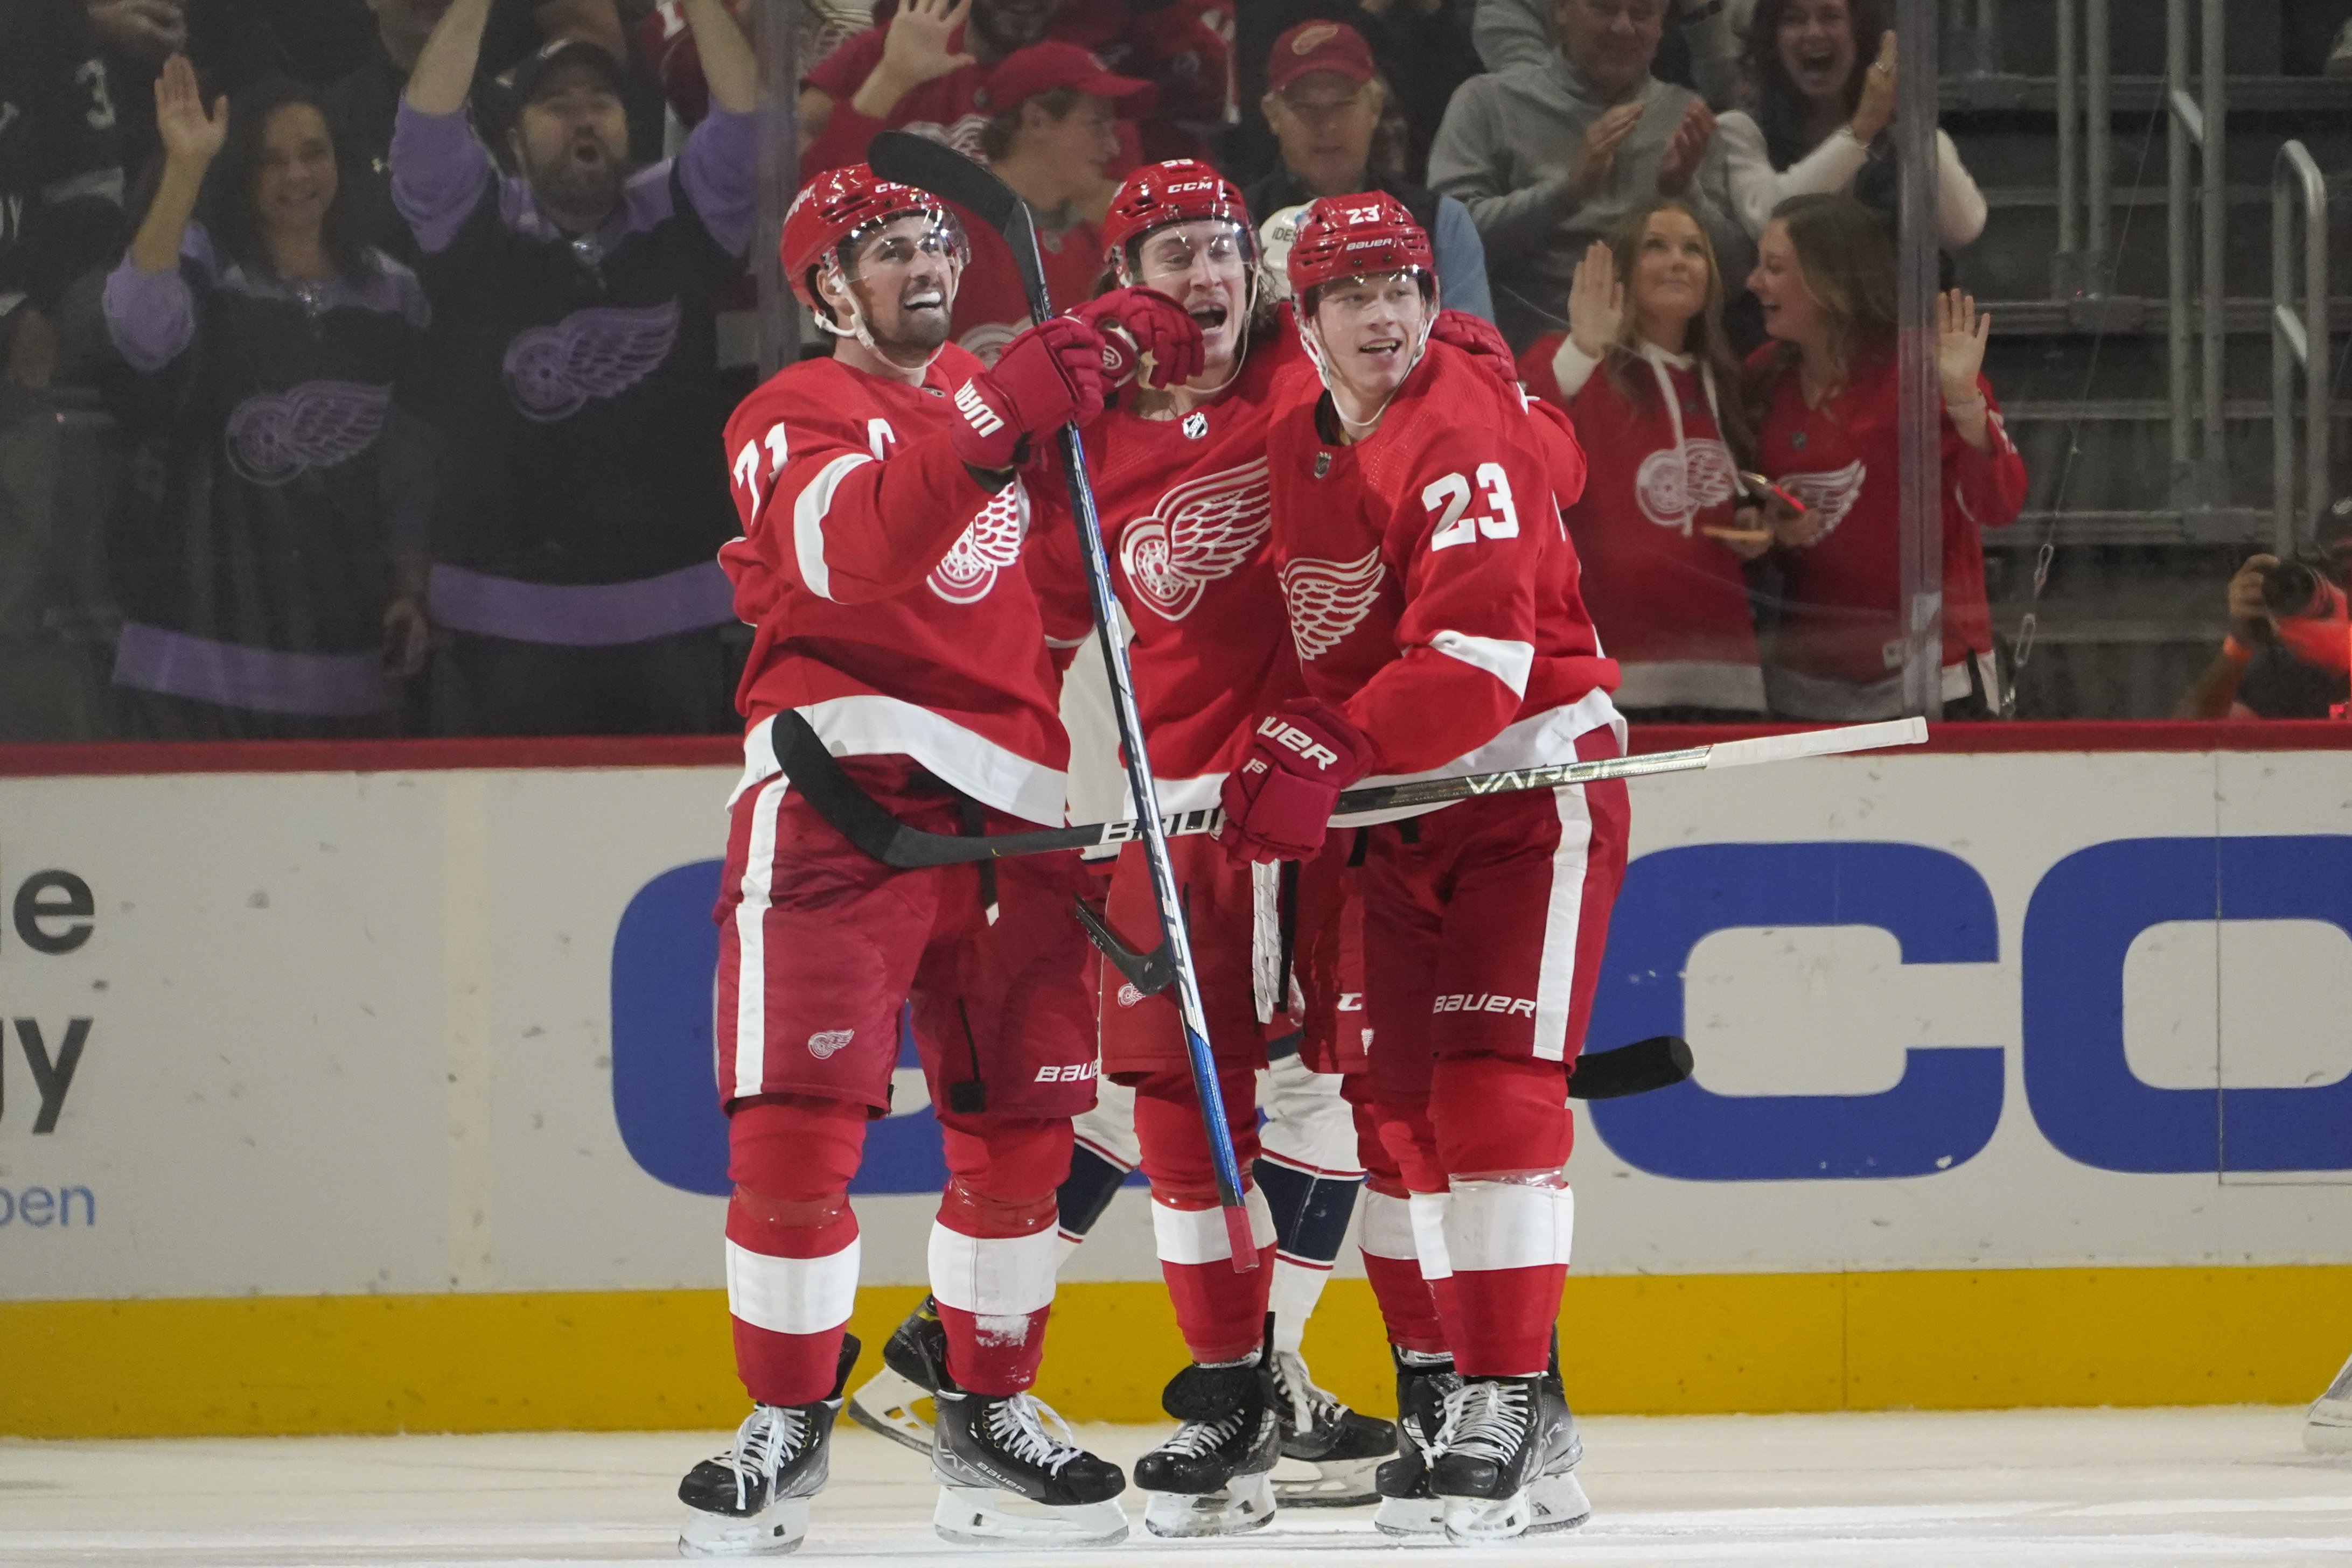 Red Wings' Moritz Seider named NHL Rookie of the Month in October